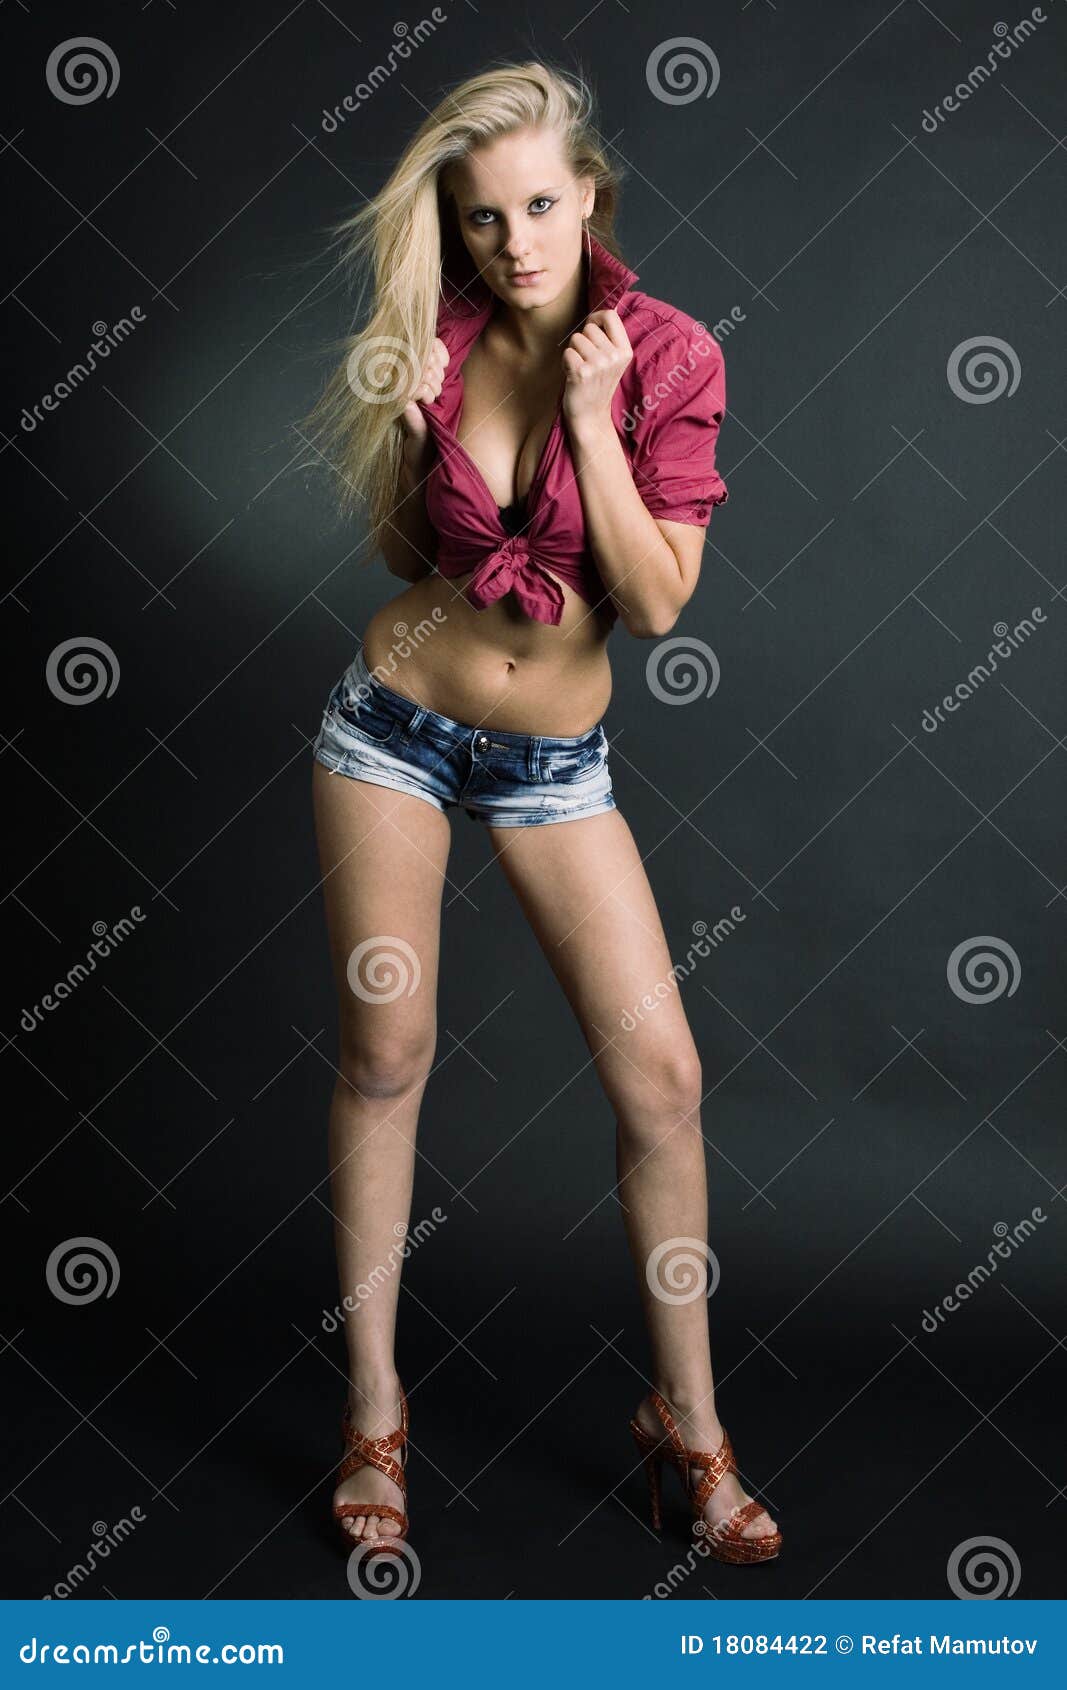 Sensual Young Woman Image & Photo (Free Trial)